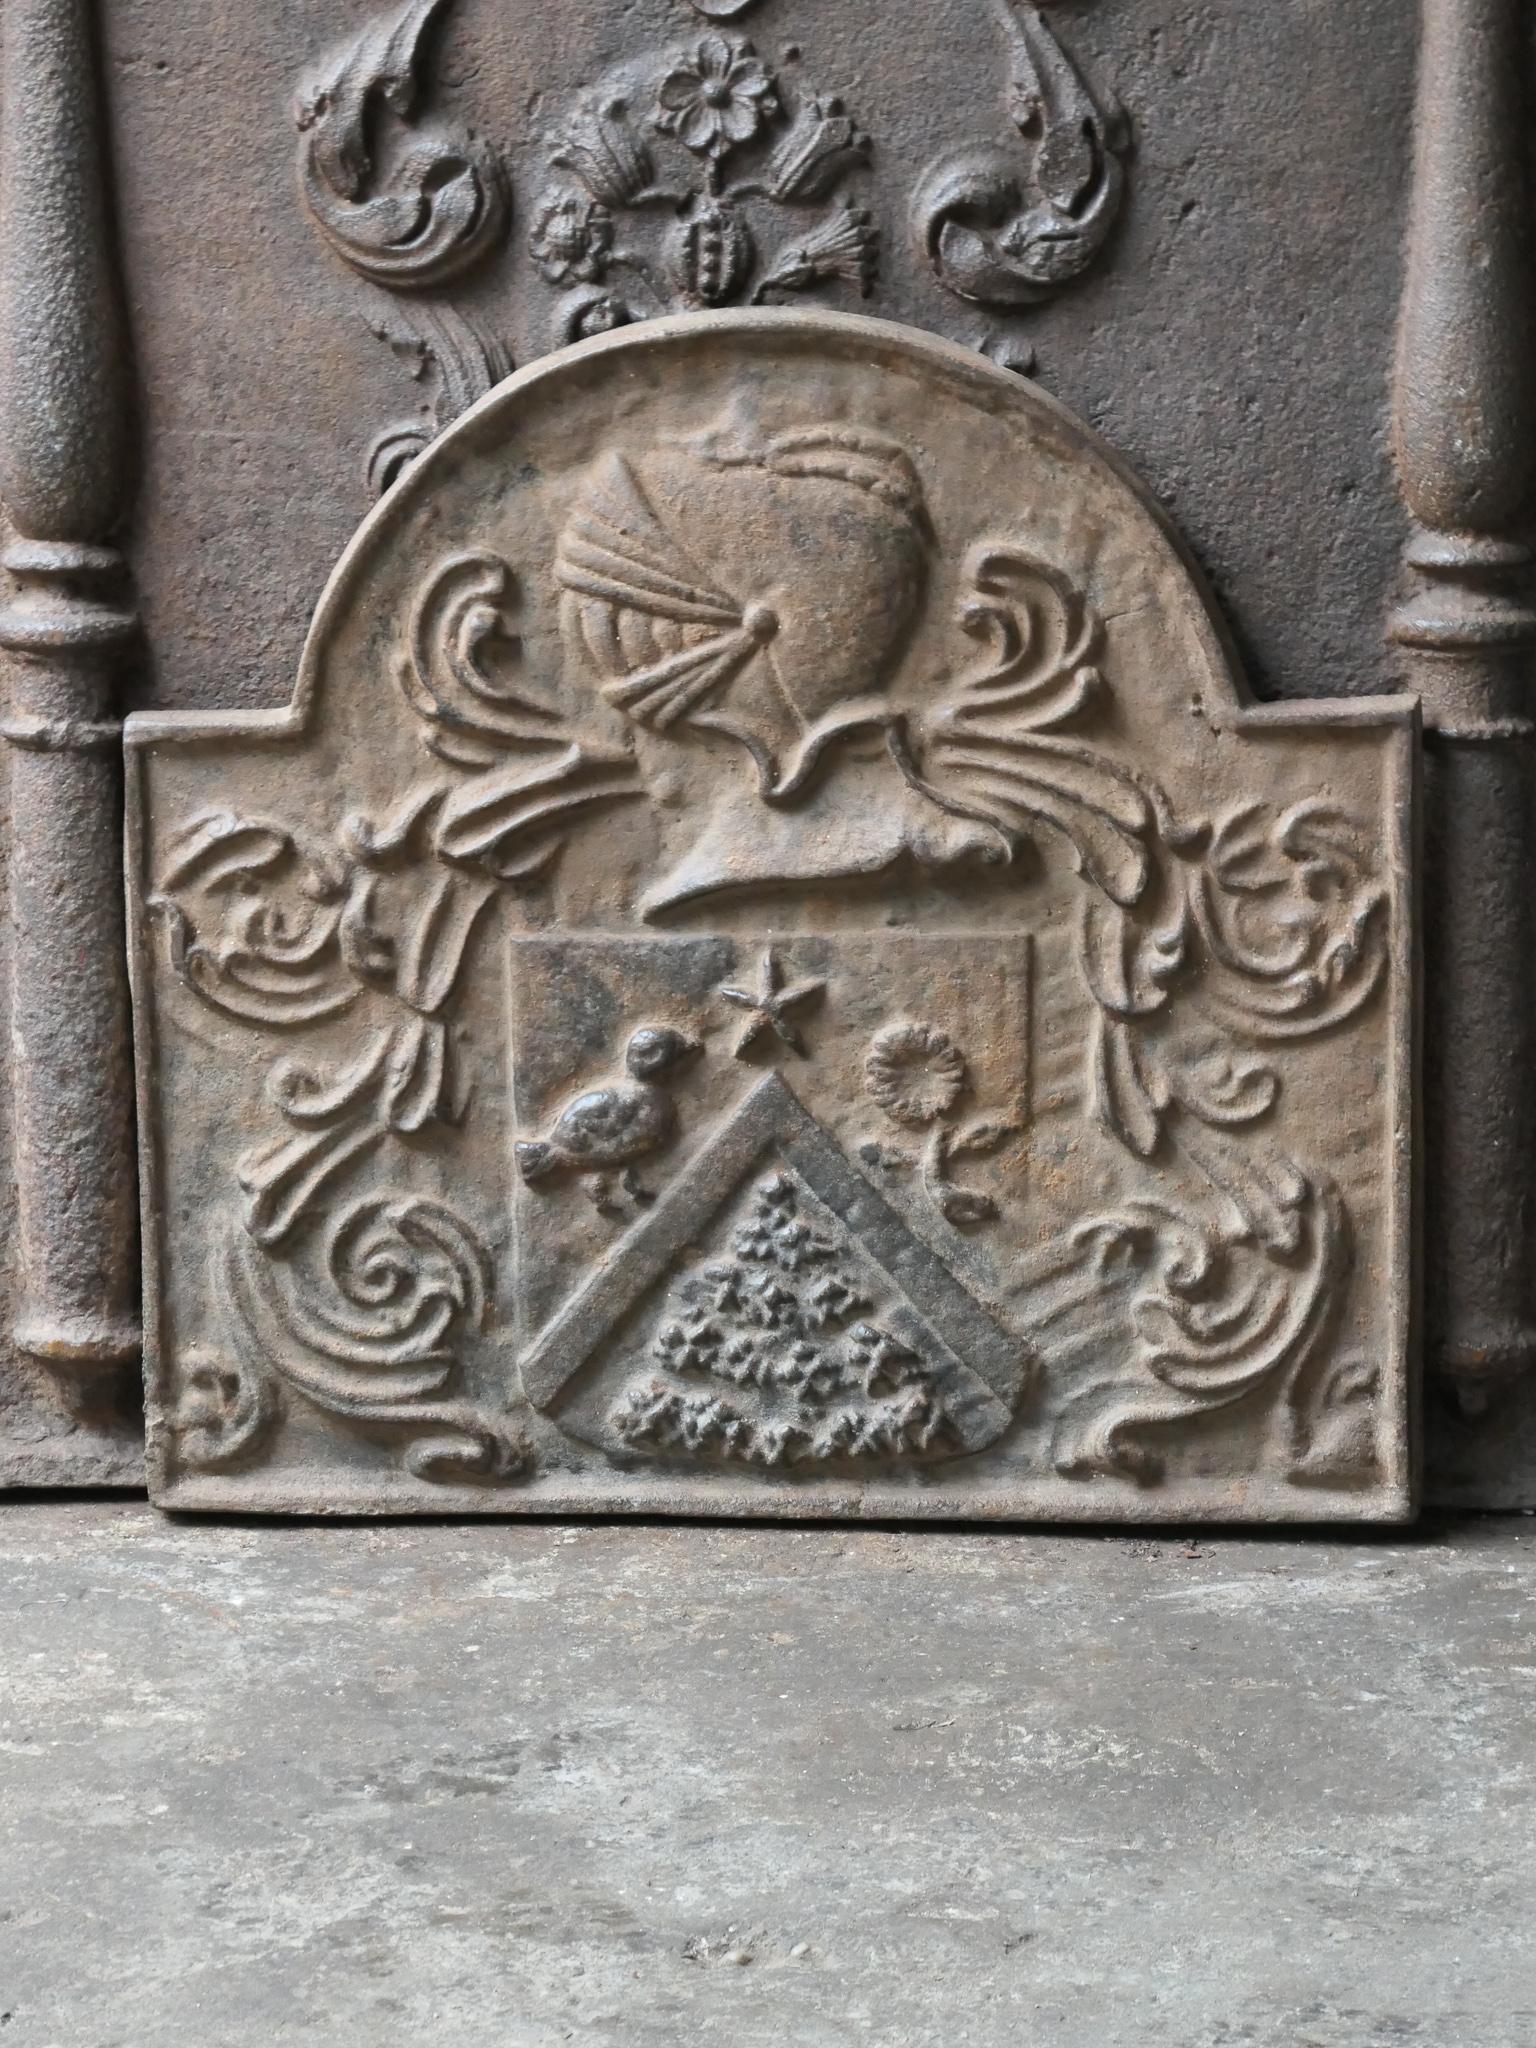 20th century French Louis XIV style fireback with an unknown coat of arms. 

The fireback is made of cast iron and has a brown patina. It can be made black / pewter upon request. It is in a good condition, no cracks.